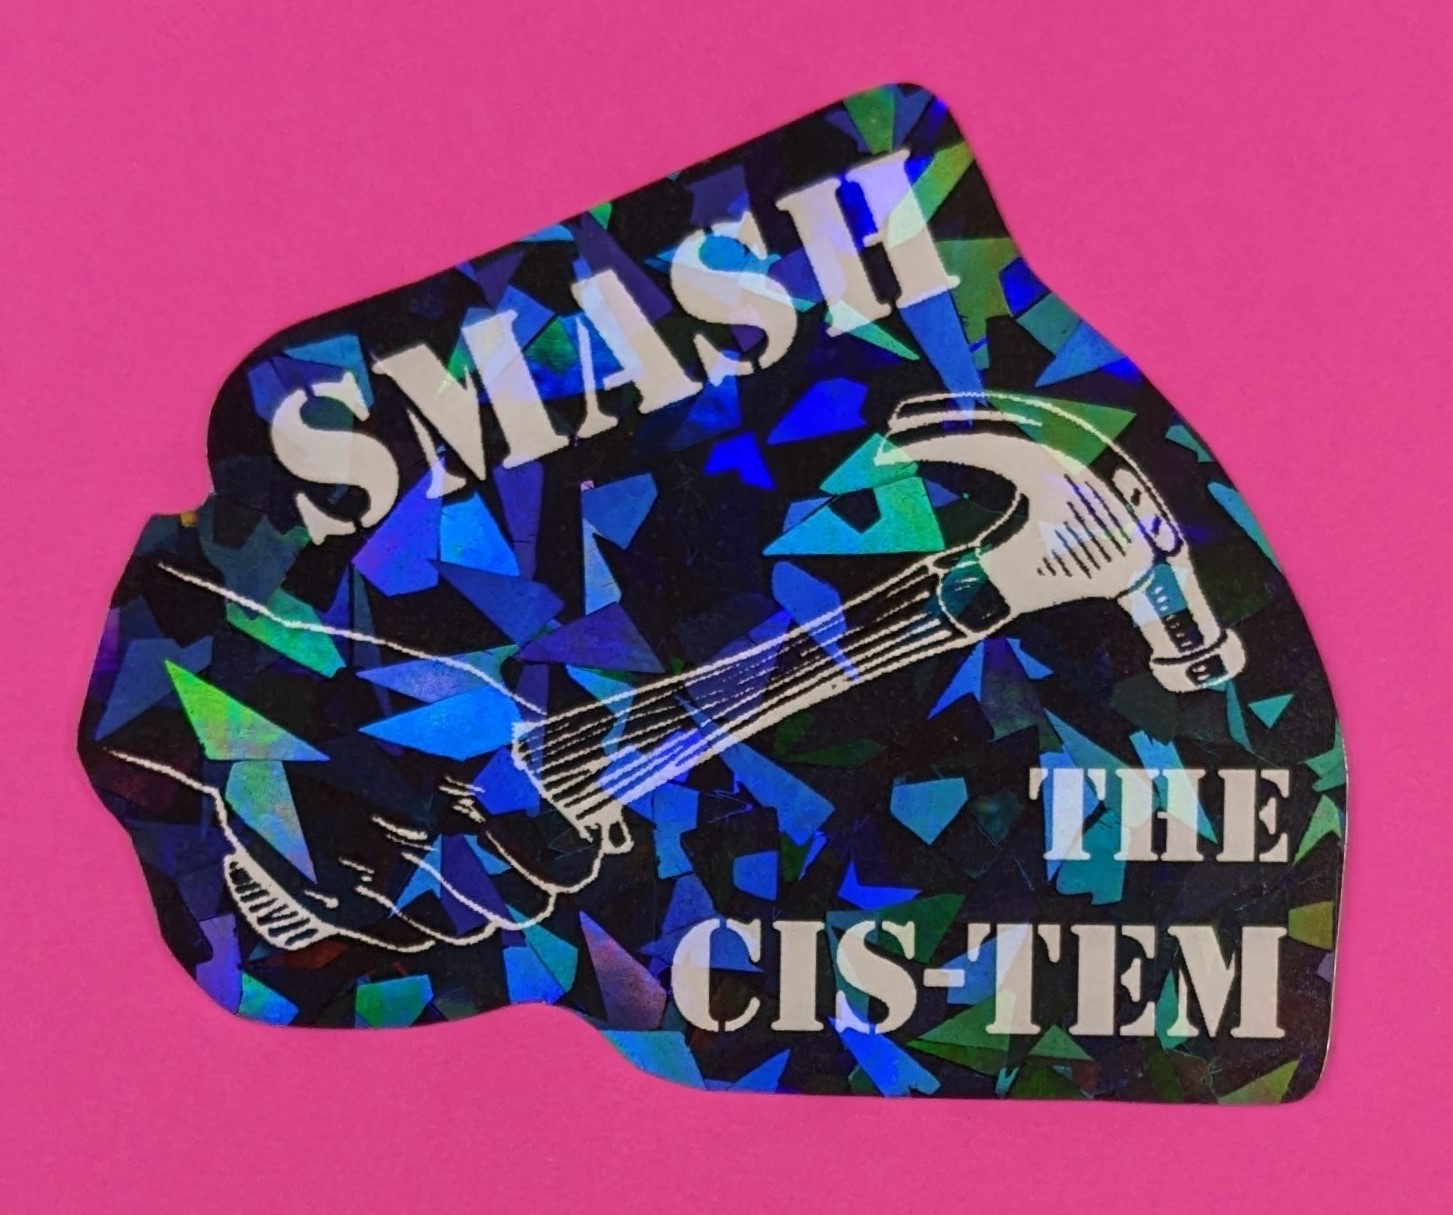 sticker with hand holding hammer and the text 'smash the cis-tem'